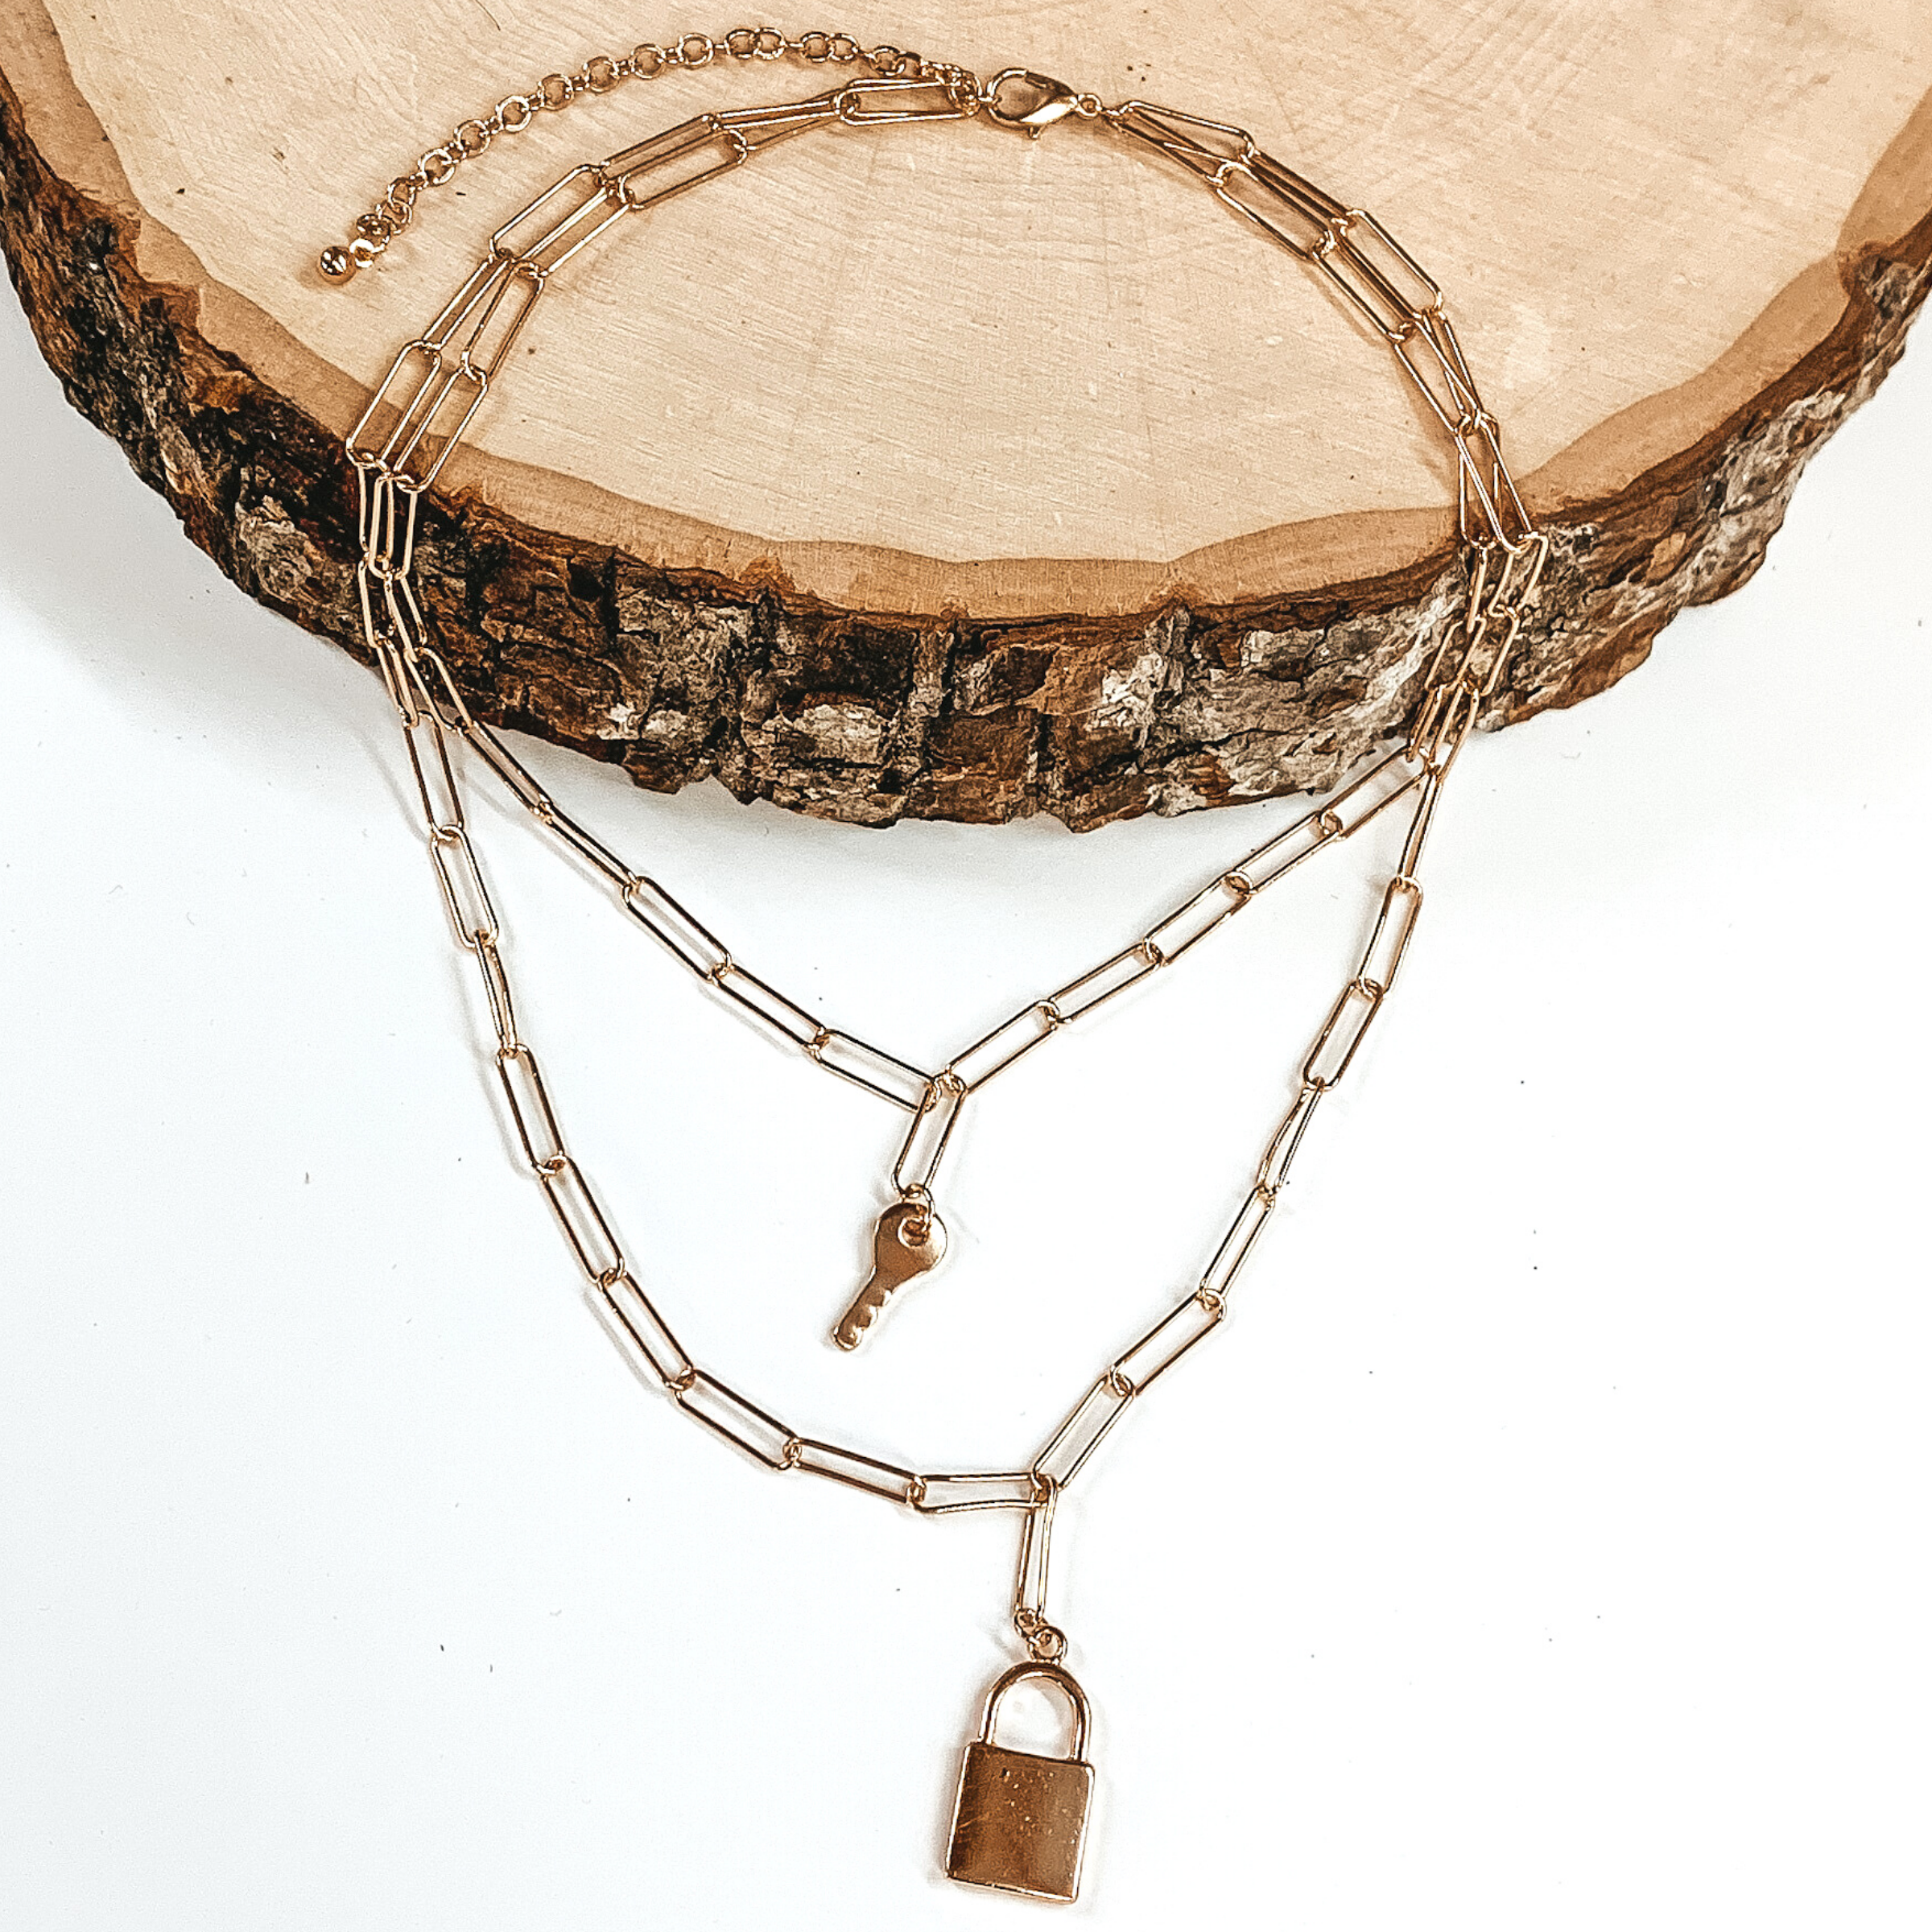 Gold double chain linked necklace. the shorter strand has a key charm and the longer strand has a lock charm. This necklace is pictured laying partially on a piece of wood on a white background.